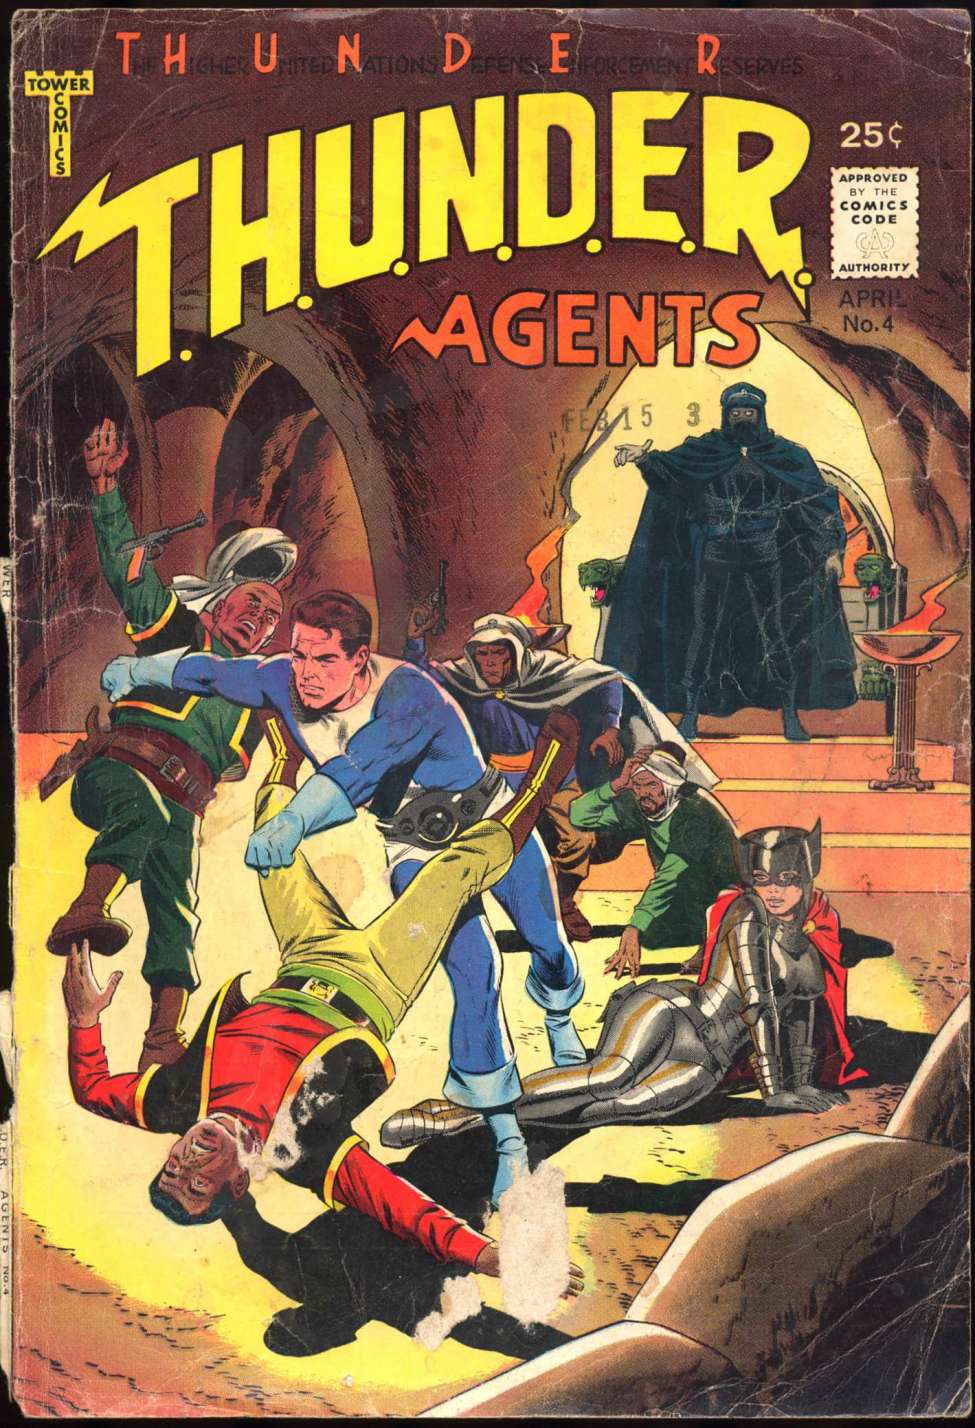 Comic Book Cover For T.H.U.N.D.E.R. Agents 4